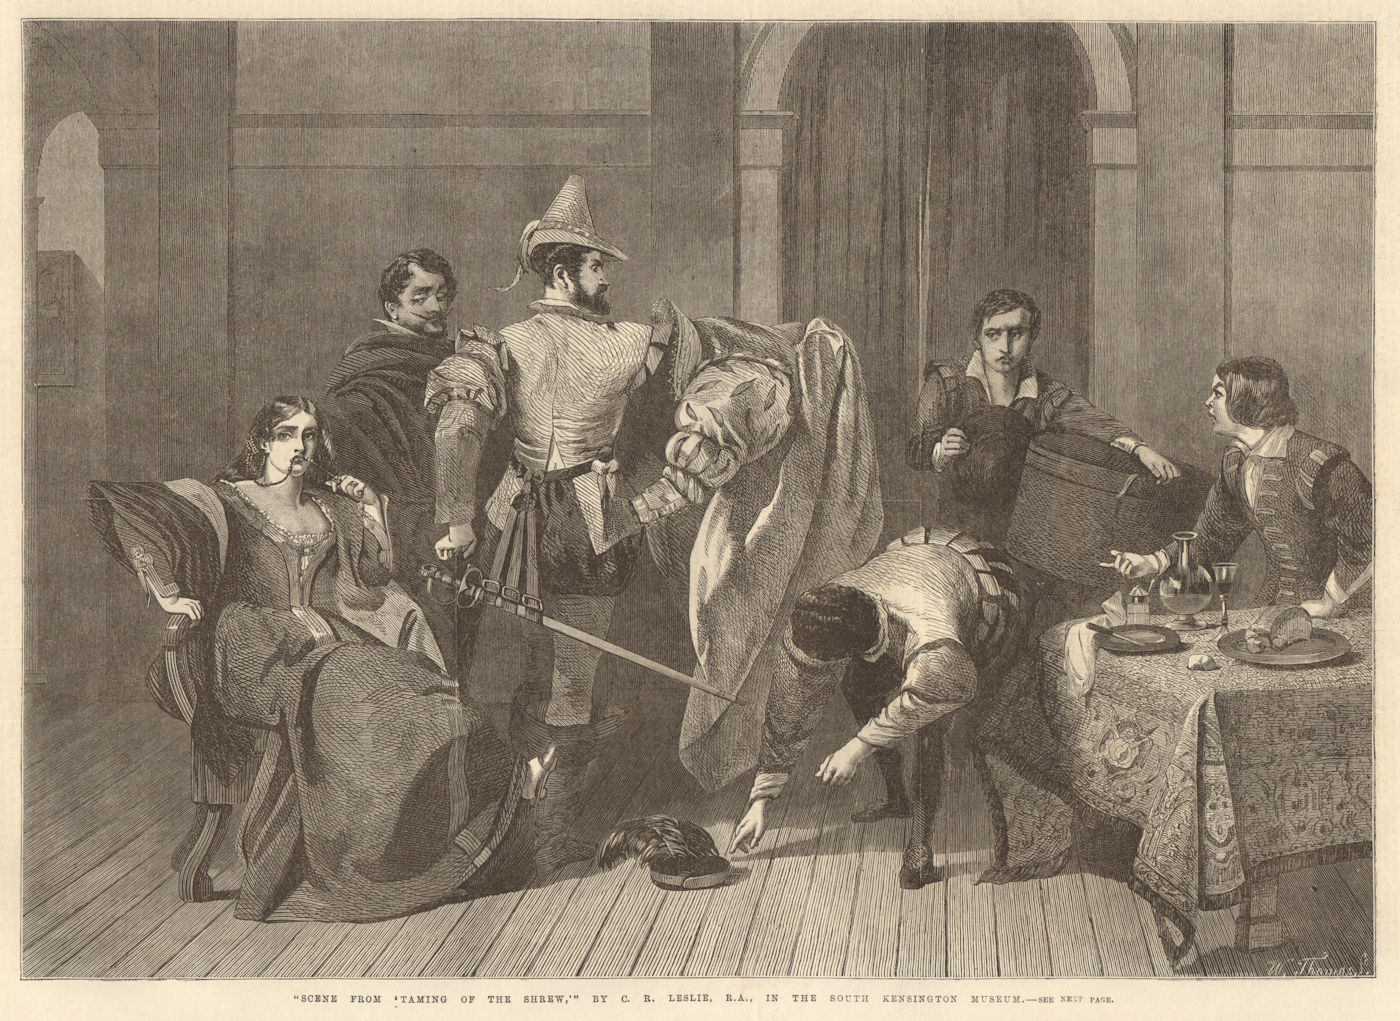 "Scene from 'Taming of the shrew' "by C. R. Leslie, R. A. Shakespeare 1866